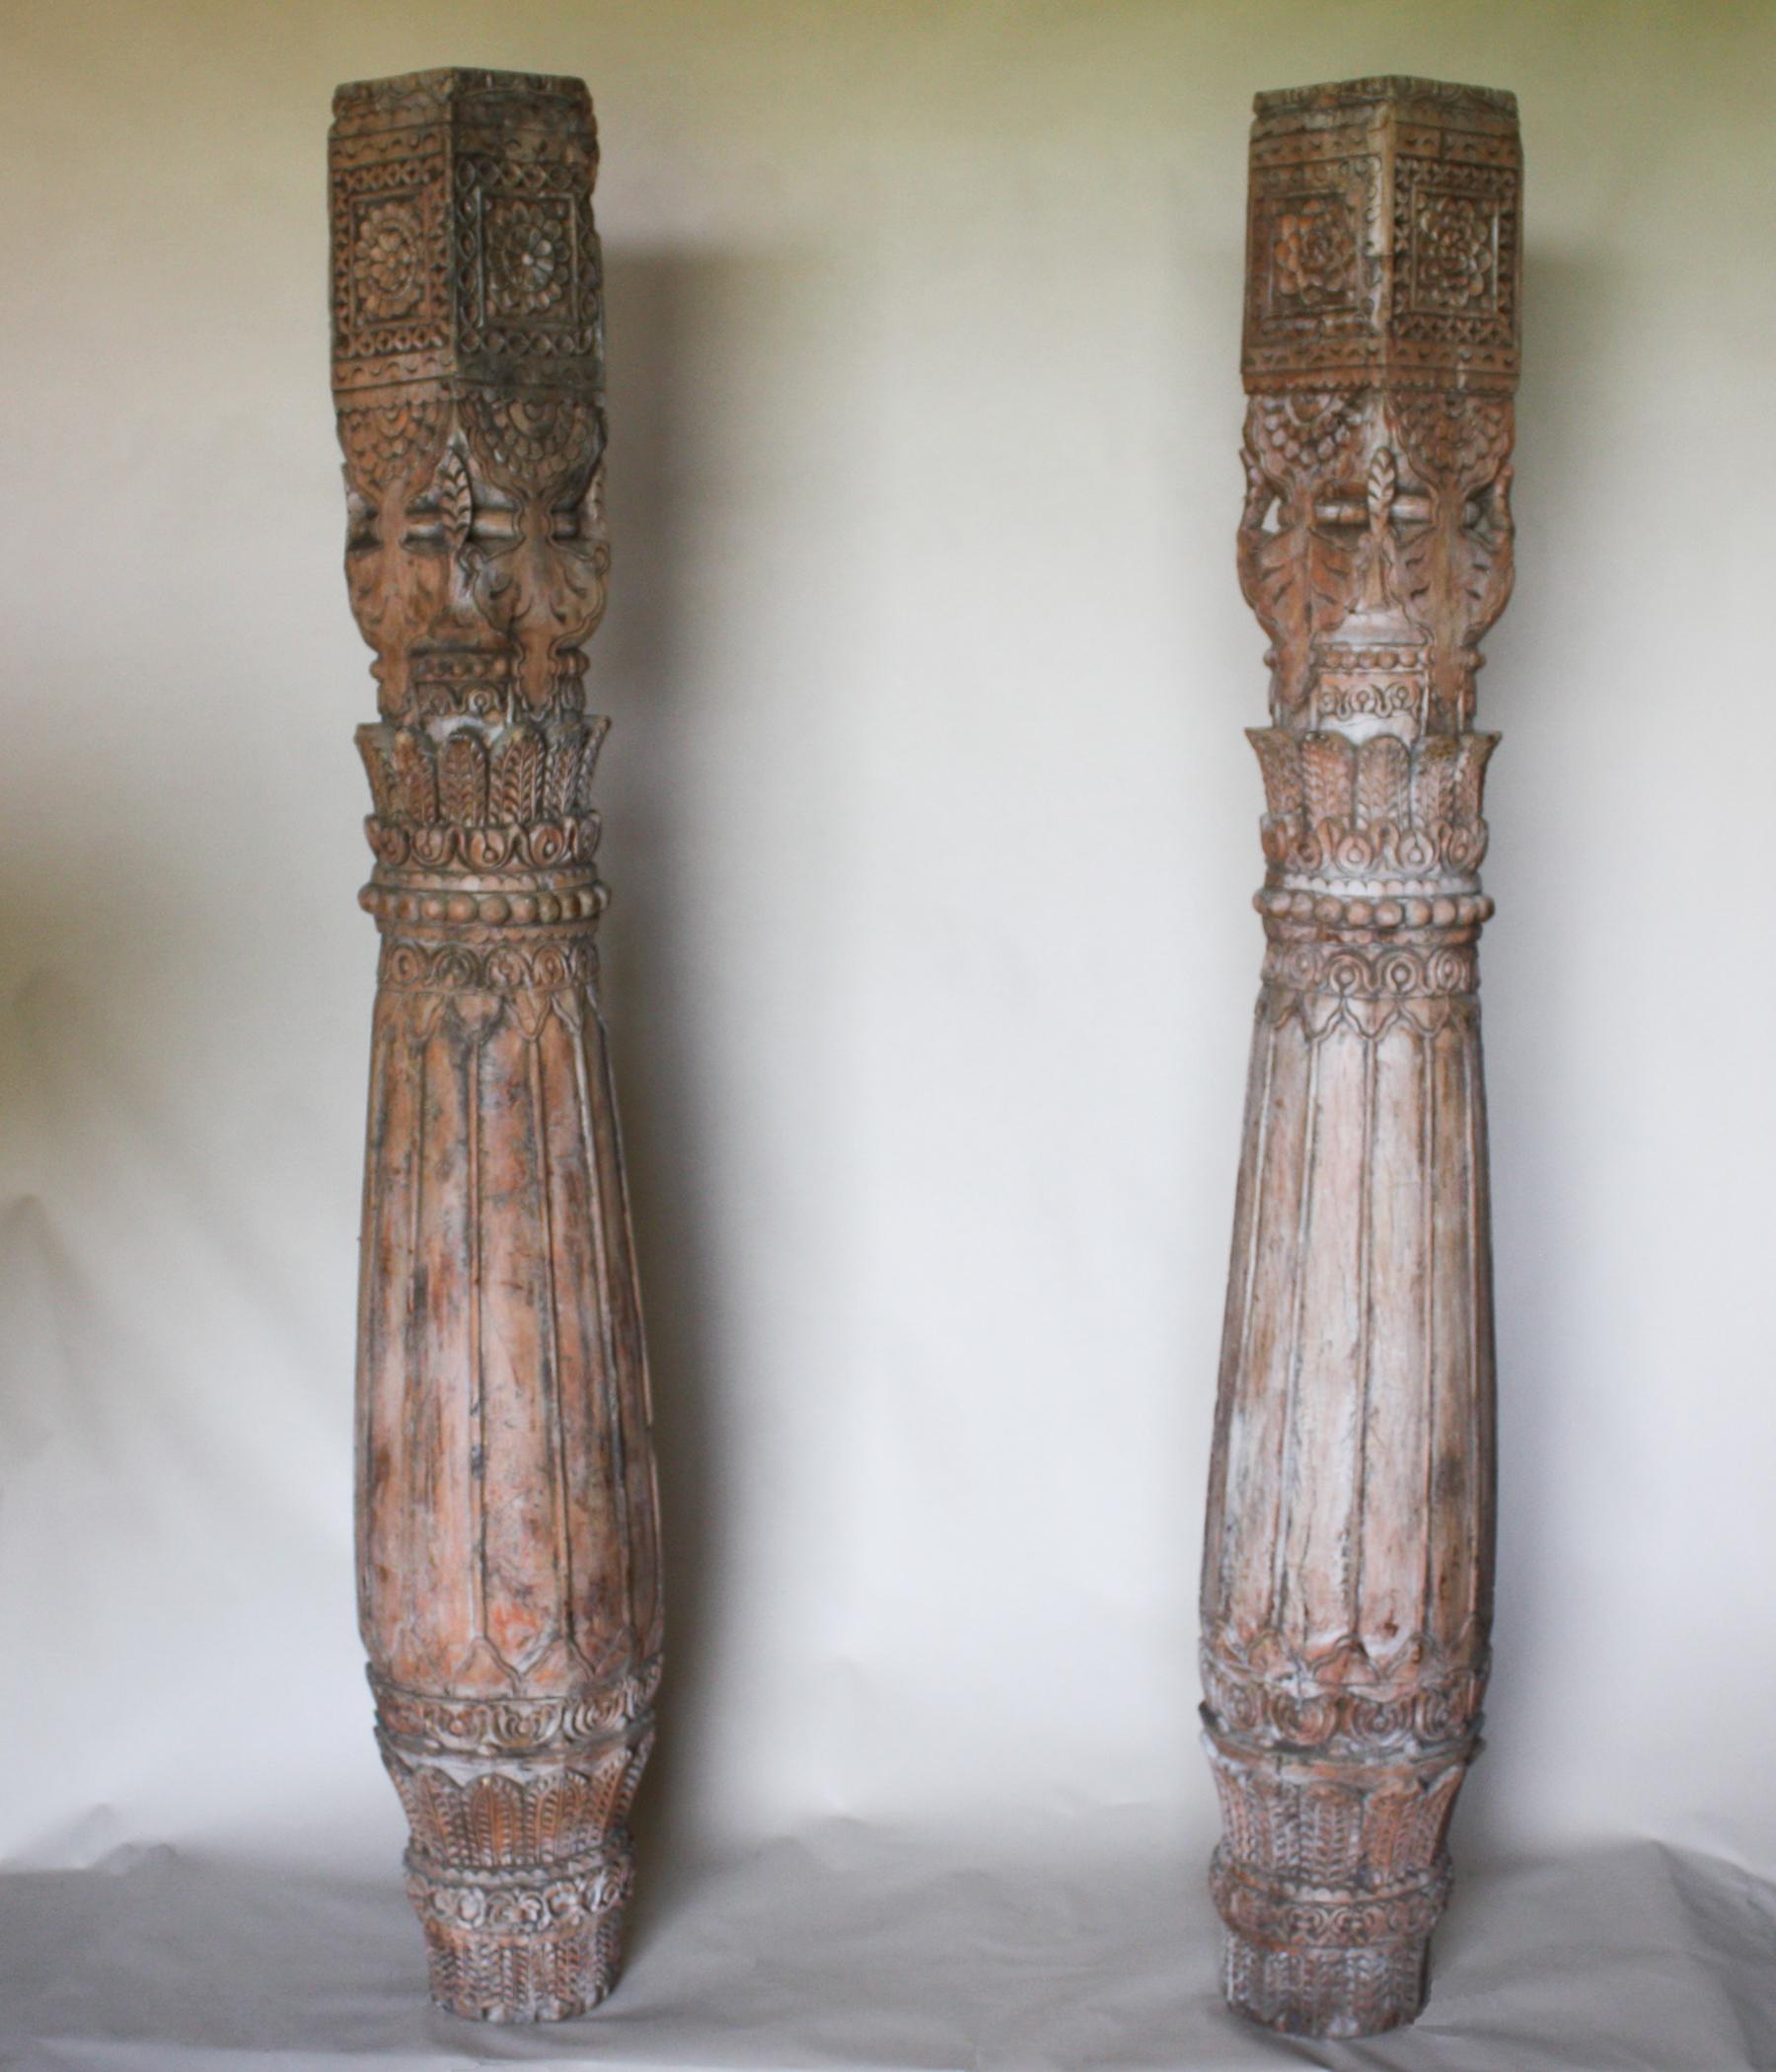 An exciting pair of hand carved teak wood pillars from Rajasthan, India. These late 19th century columns have an attractive form, wood tone and patina.
Measures: Height 76.50 inches, width (at belly) 12.50 inches, width (at top) 7.50 inches, width